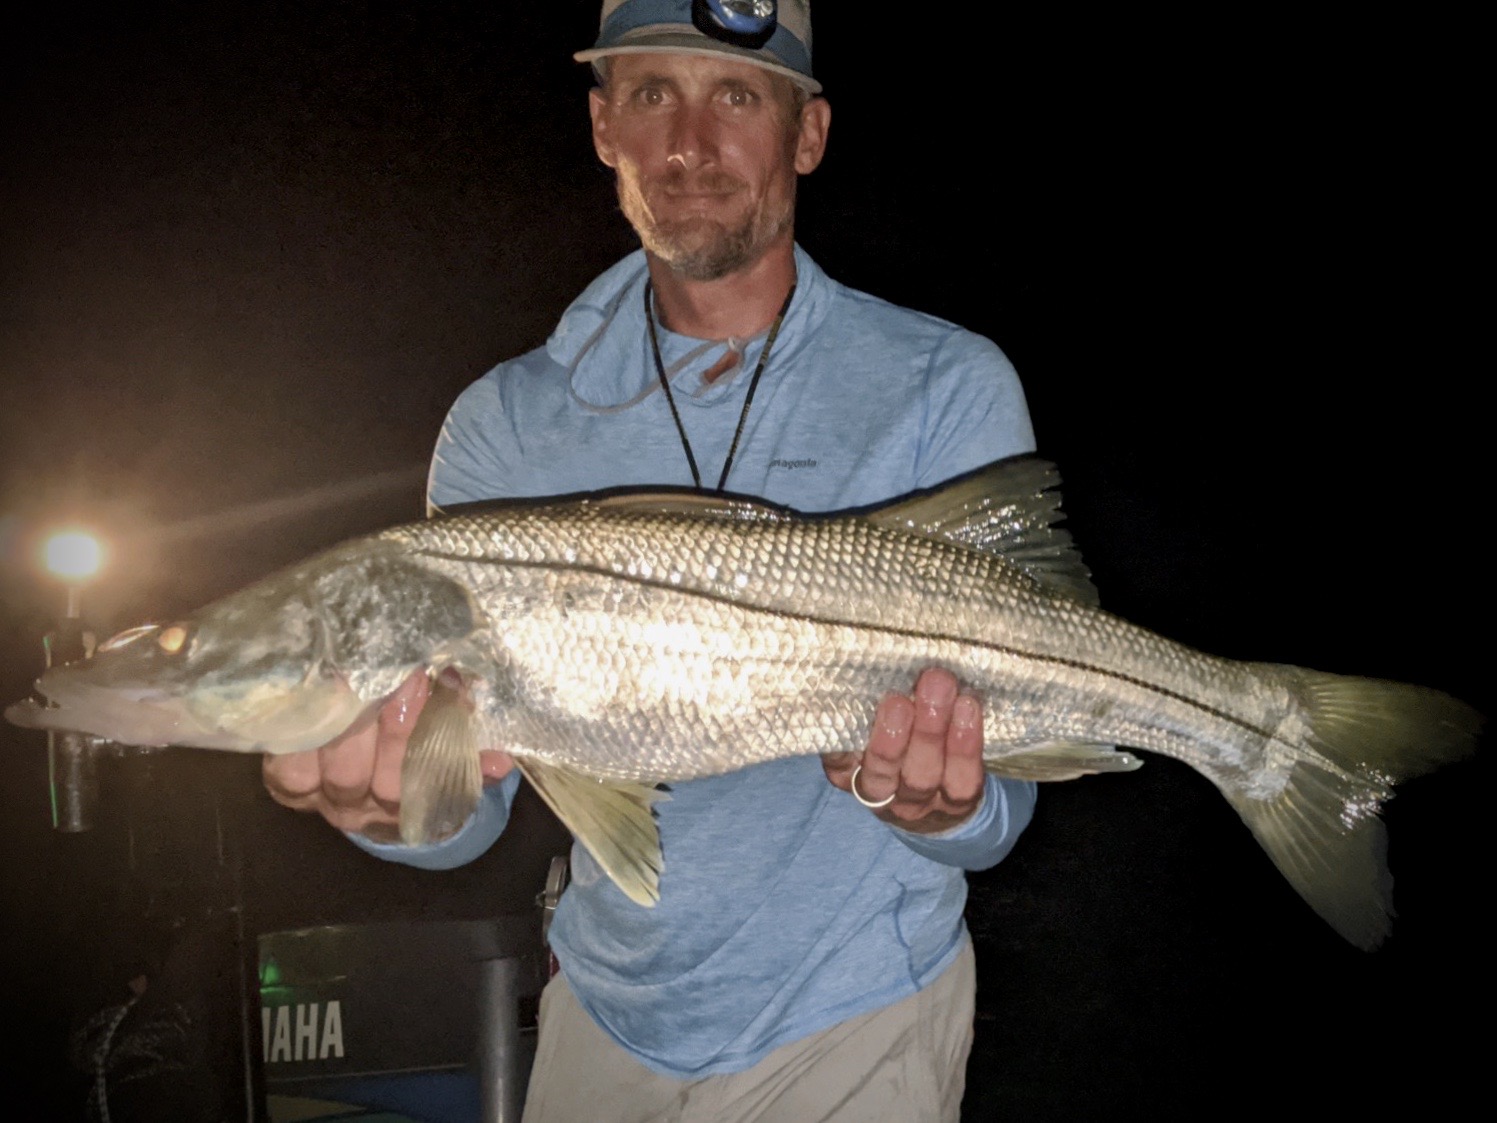 The author holds a solid snook up to the camera